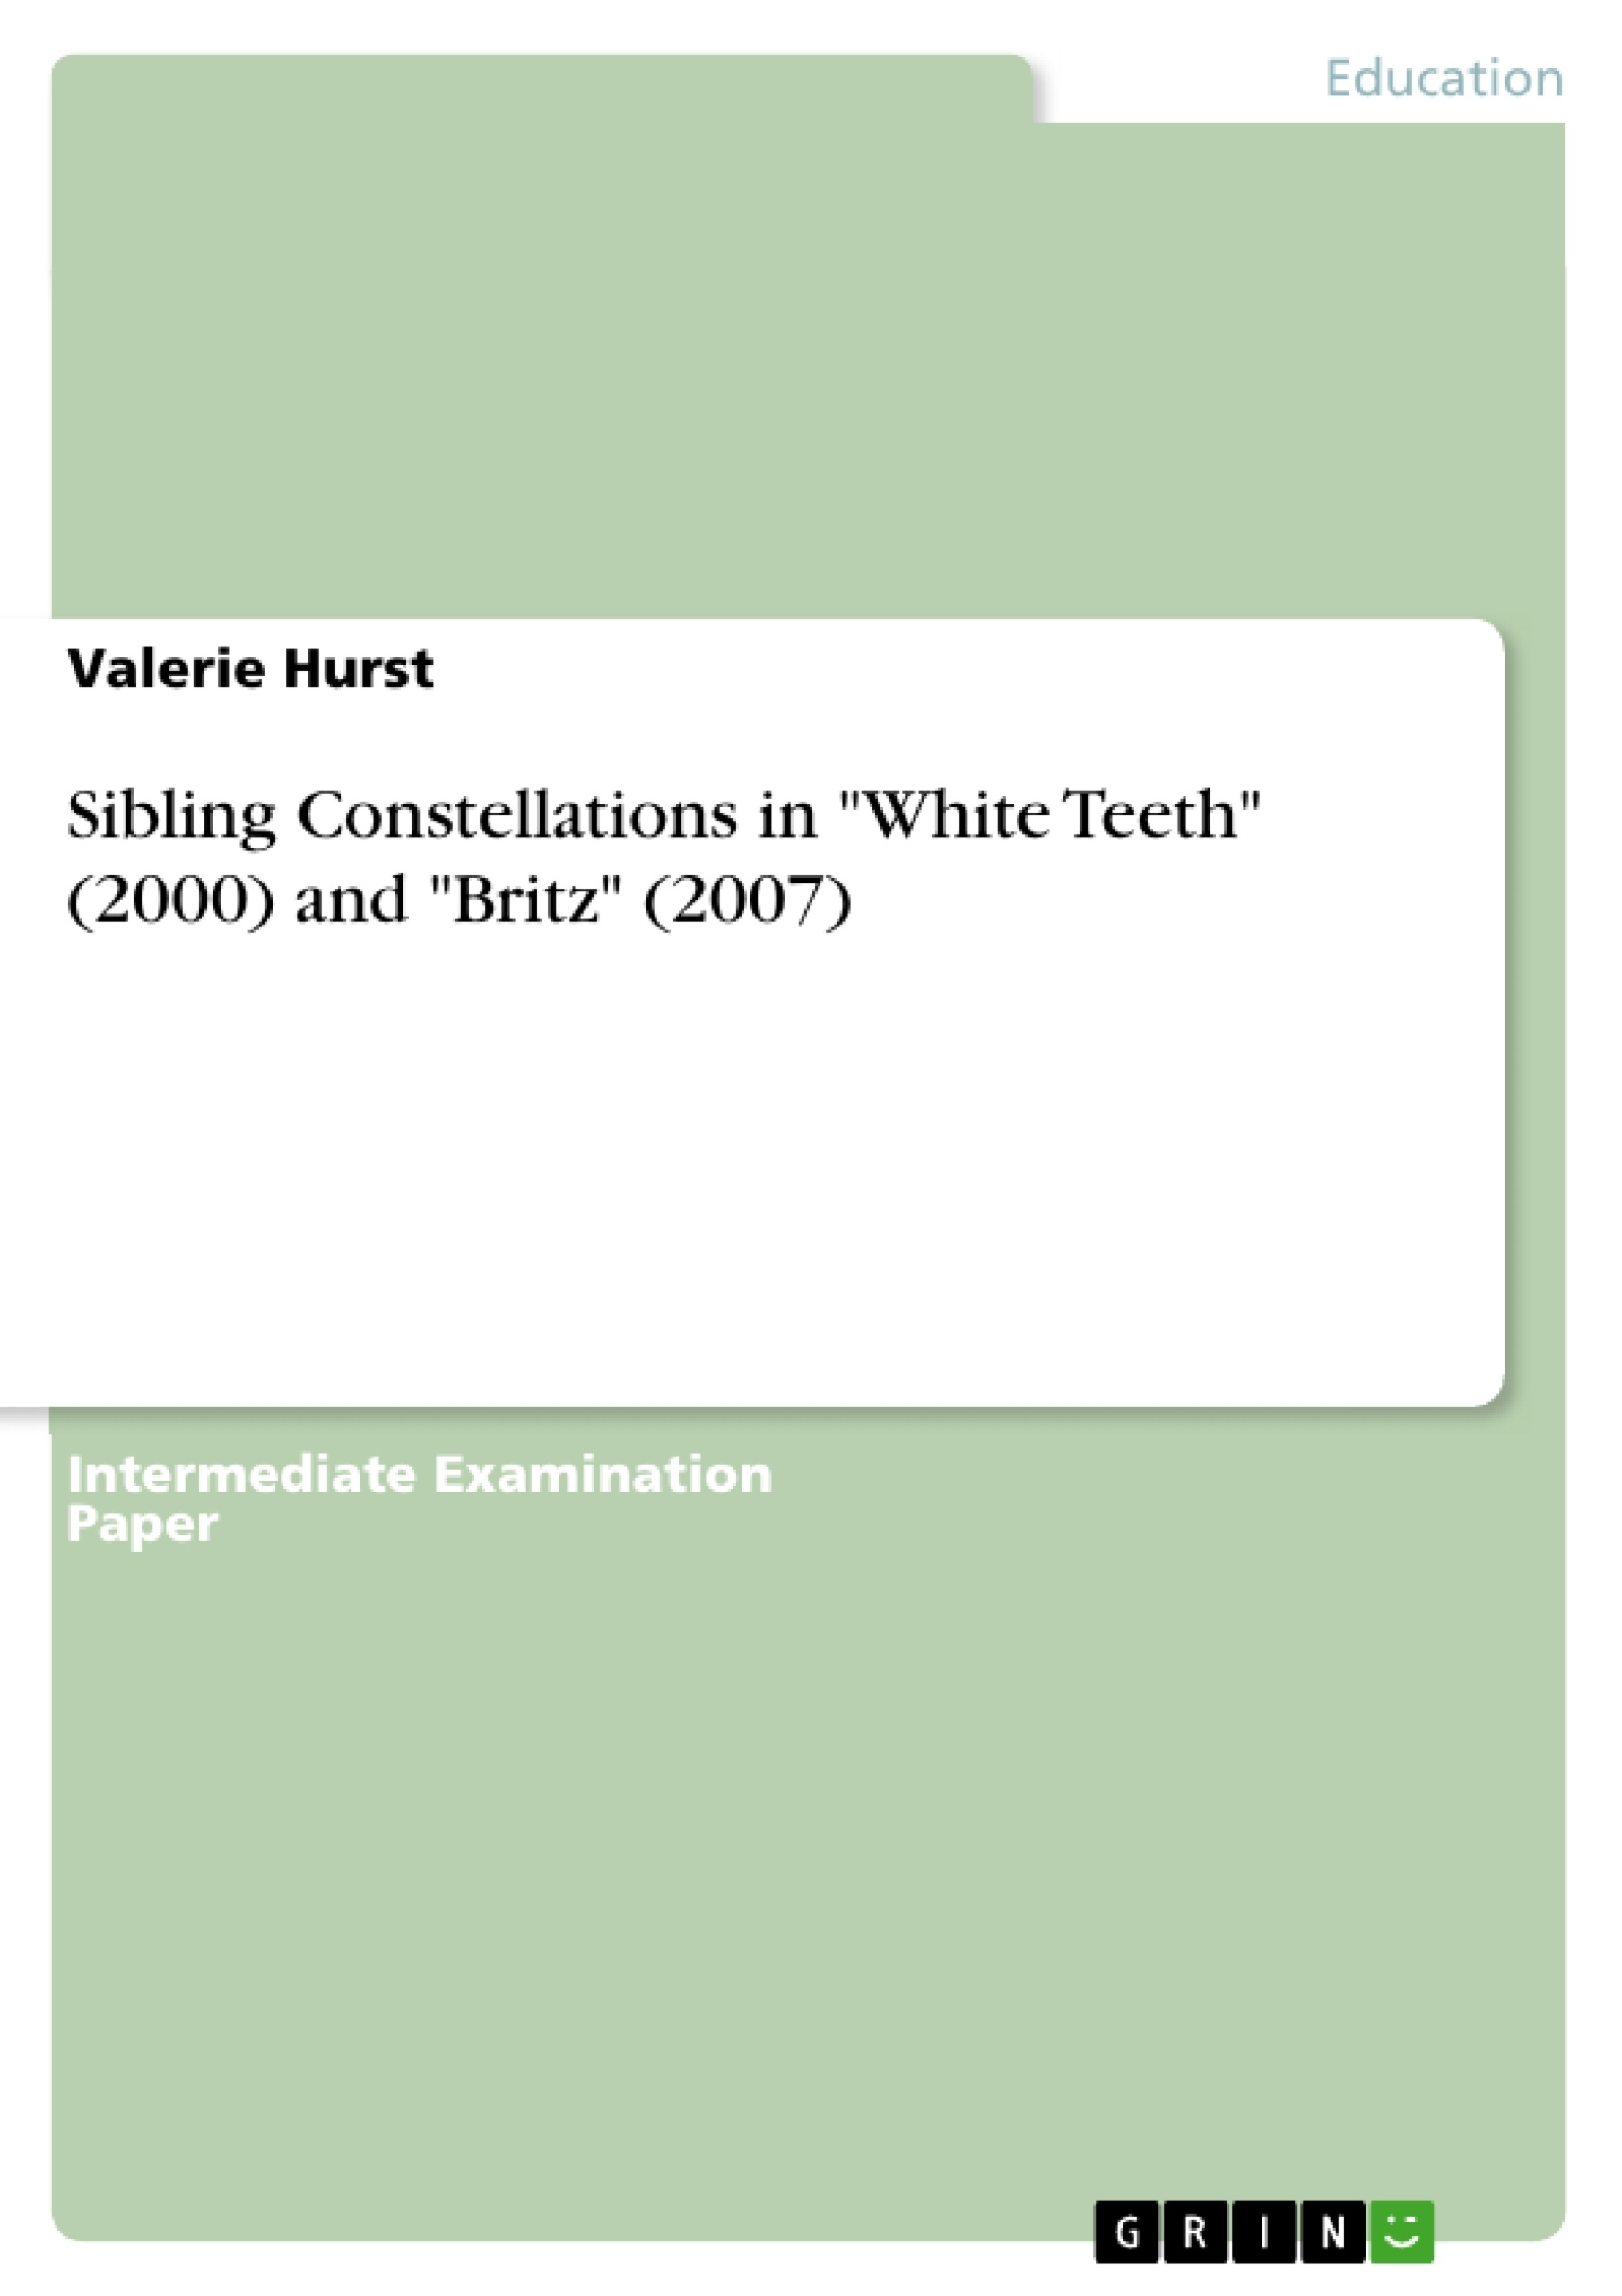 Título: Sibling Constellations in "White Teeth" (2000) and "Britz" (2007)